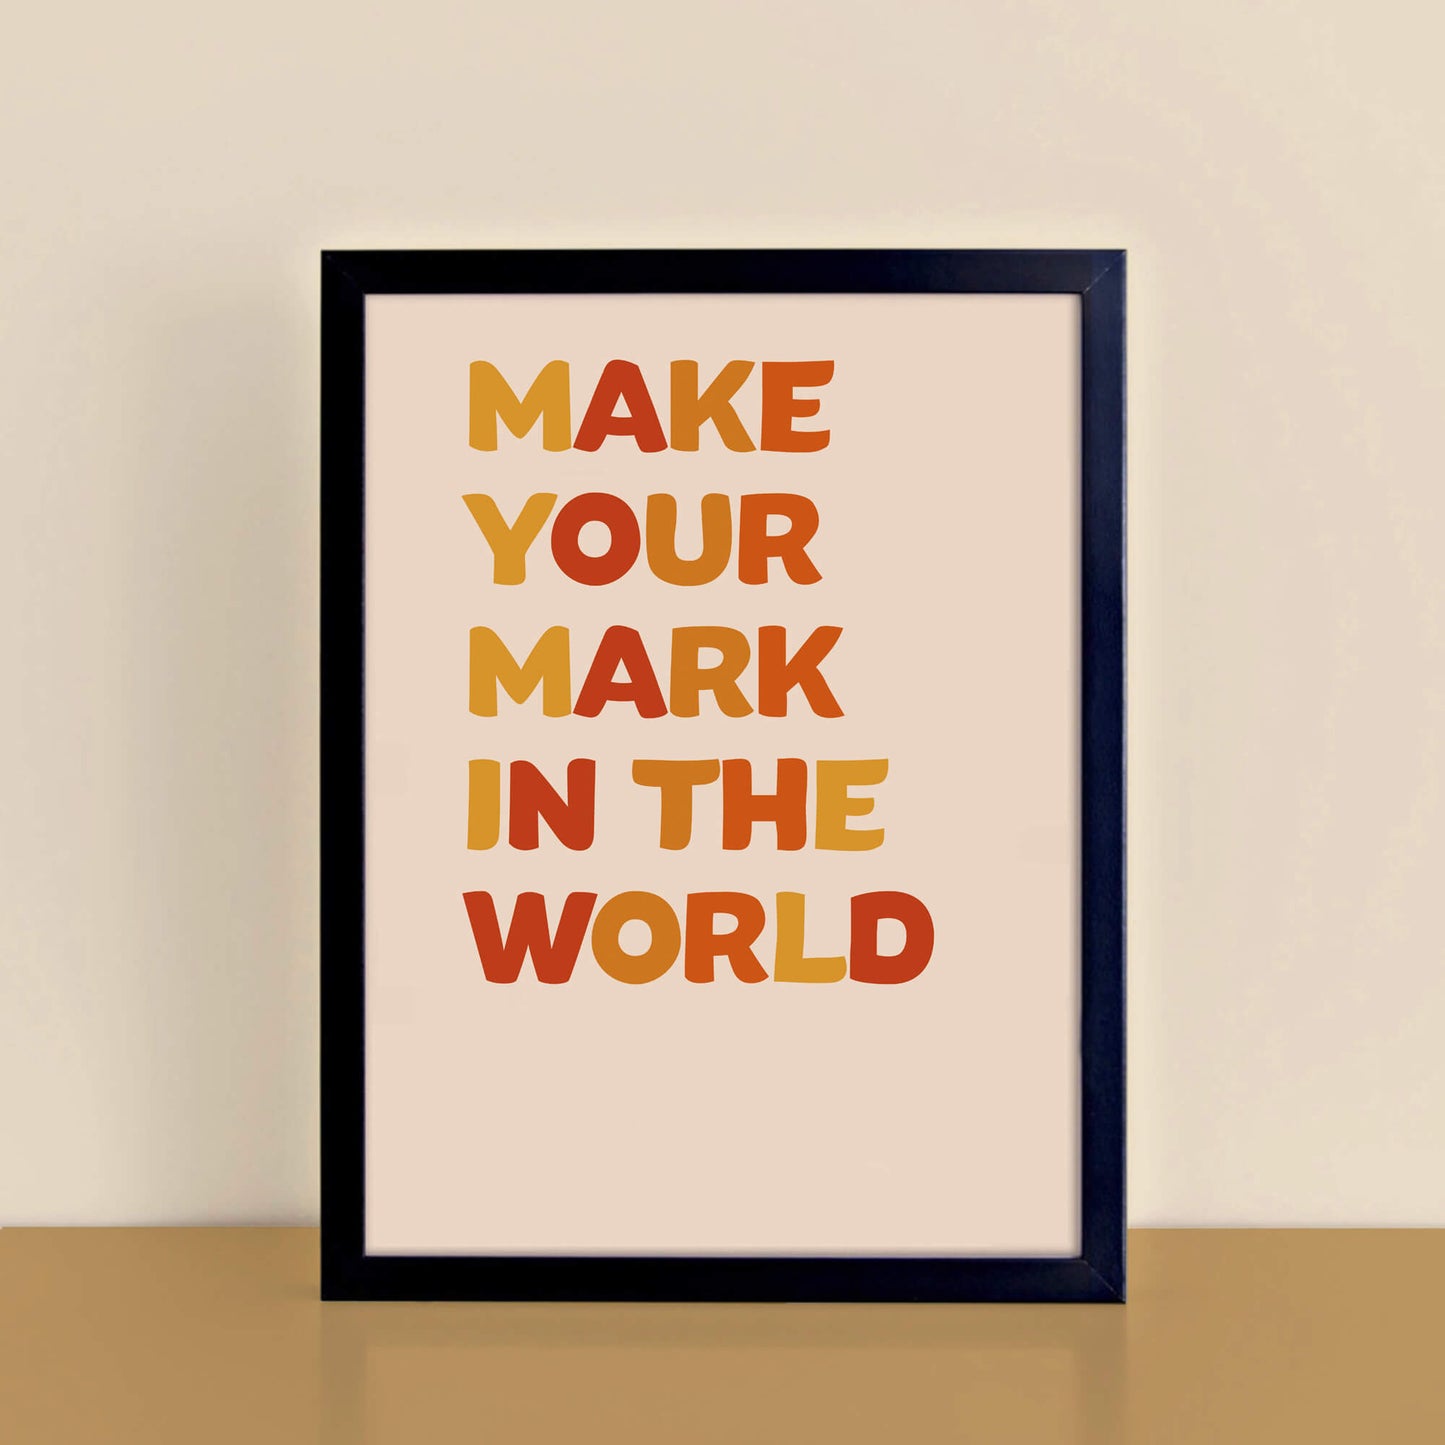 Make Your Mark In The World Print by SixElevenCreations. Product Code SEP0606